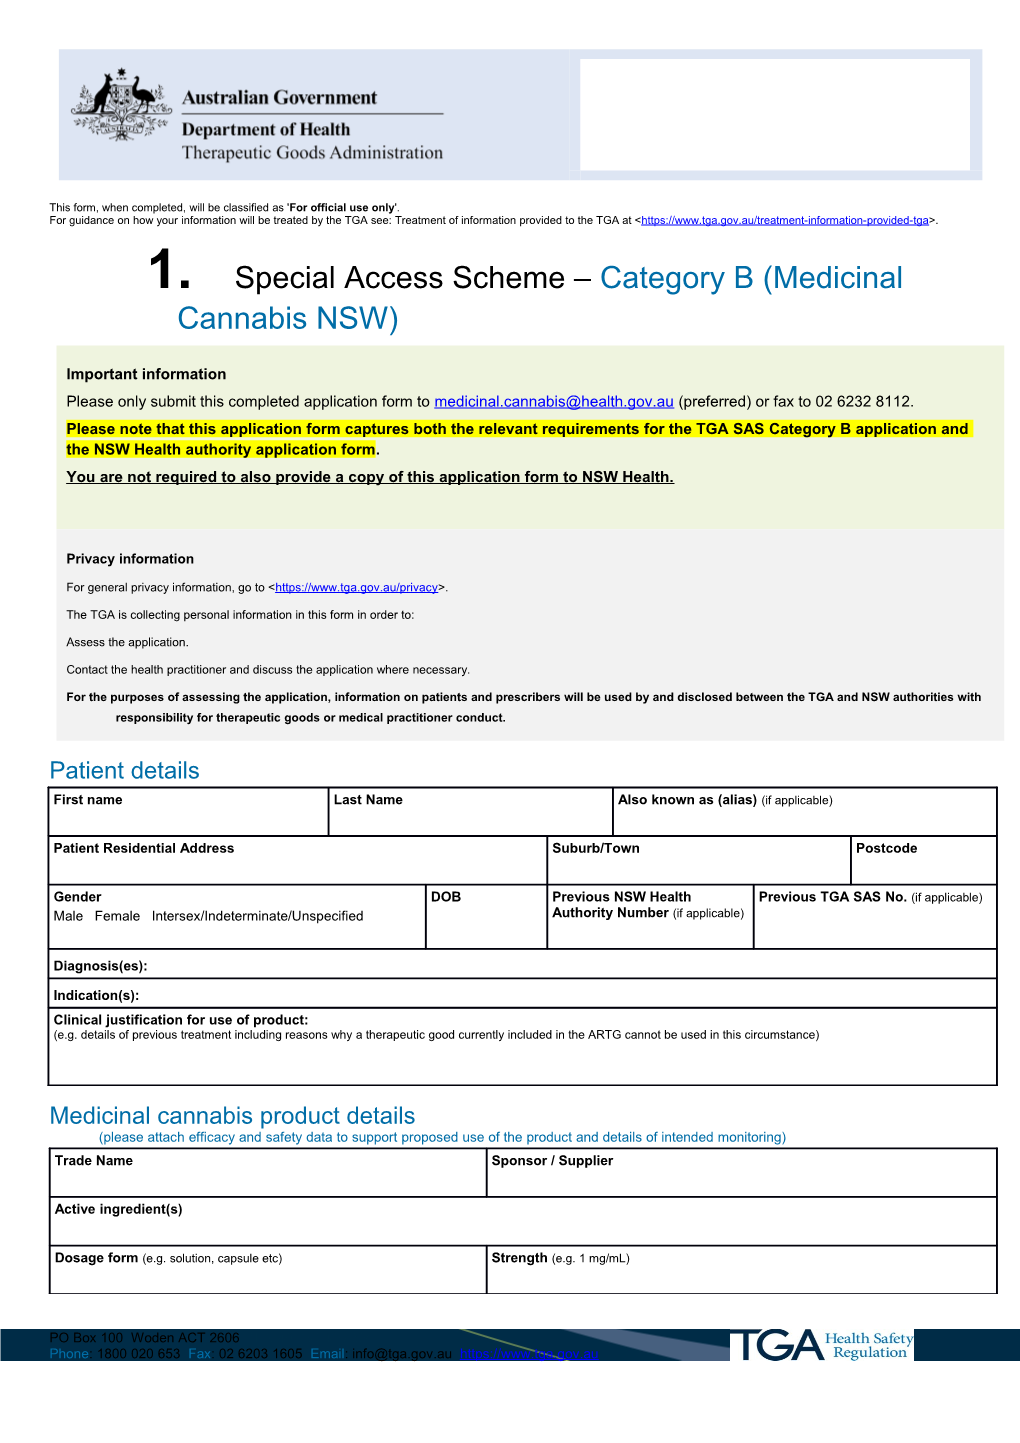 Special Access Scheme - Category B (Medicinal Cannabis NSW)